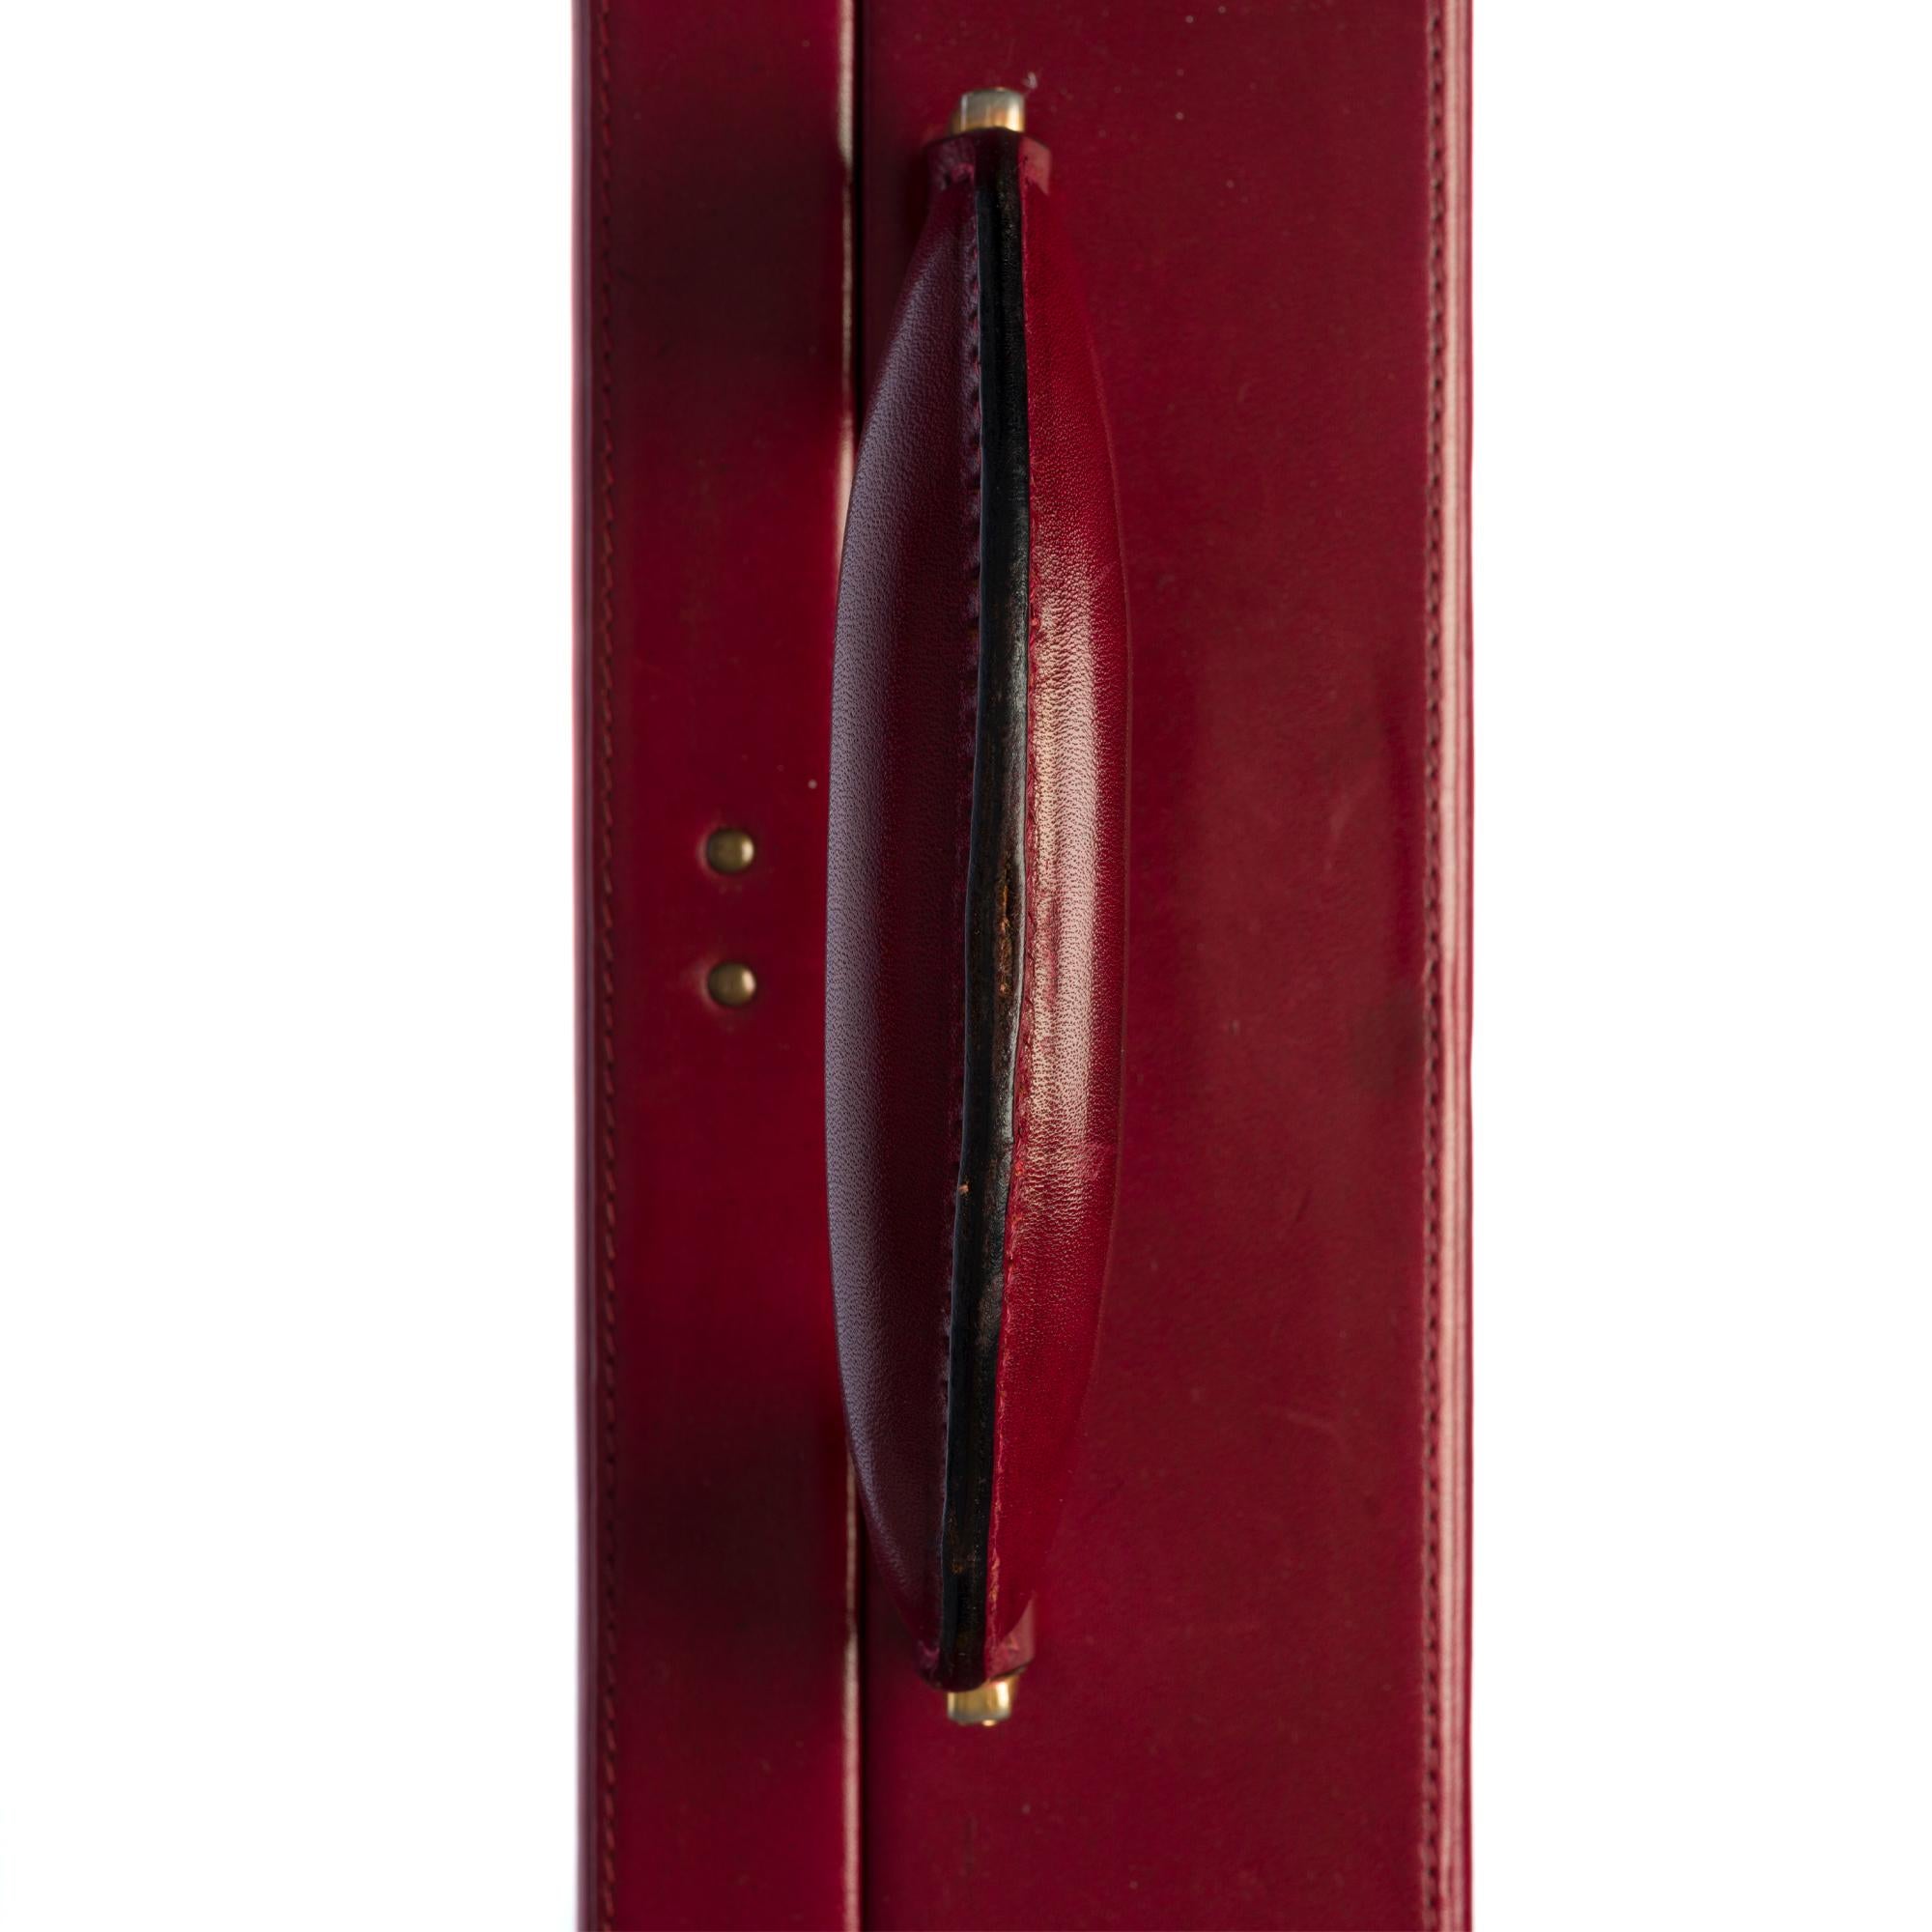 Rare Cartier Attaché Case in burgundy leather and gold hardware 1